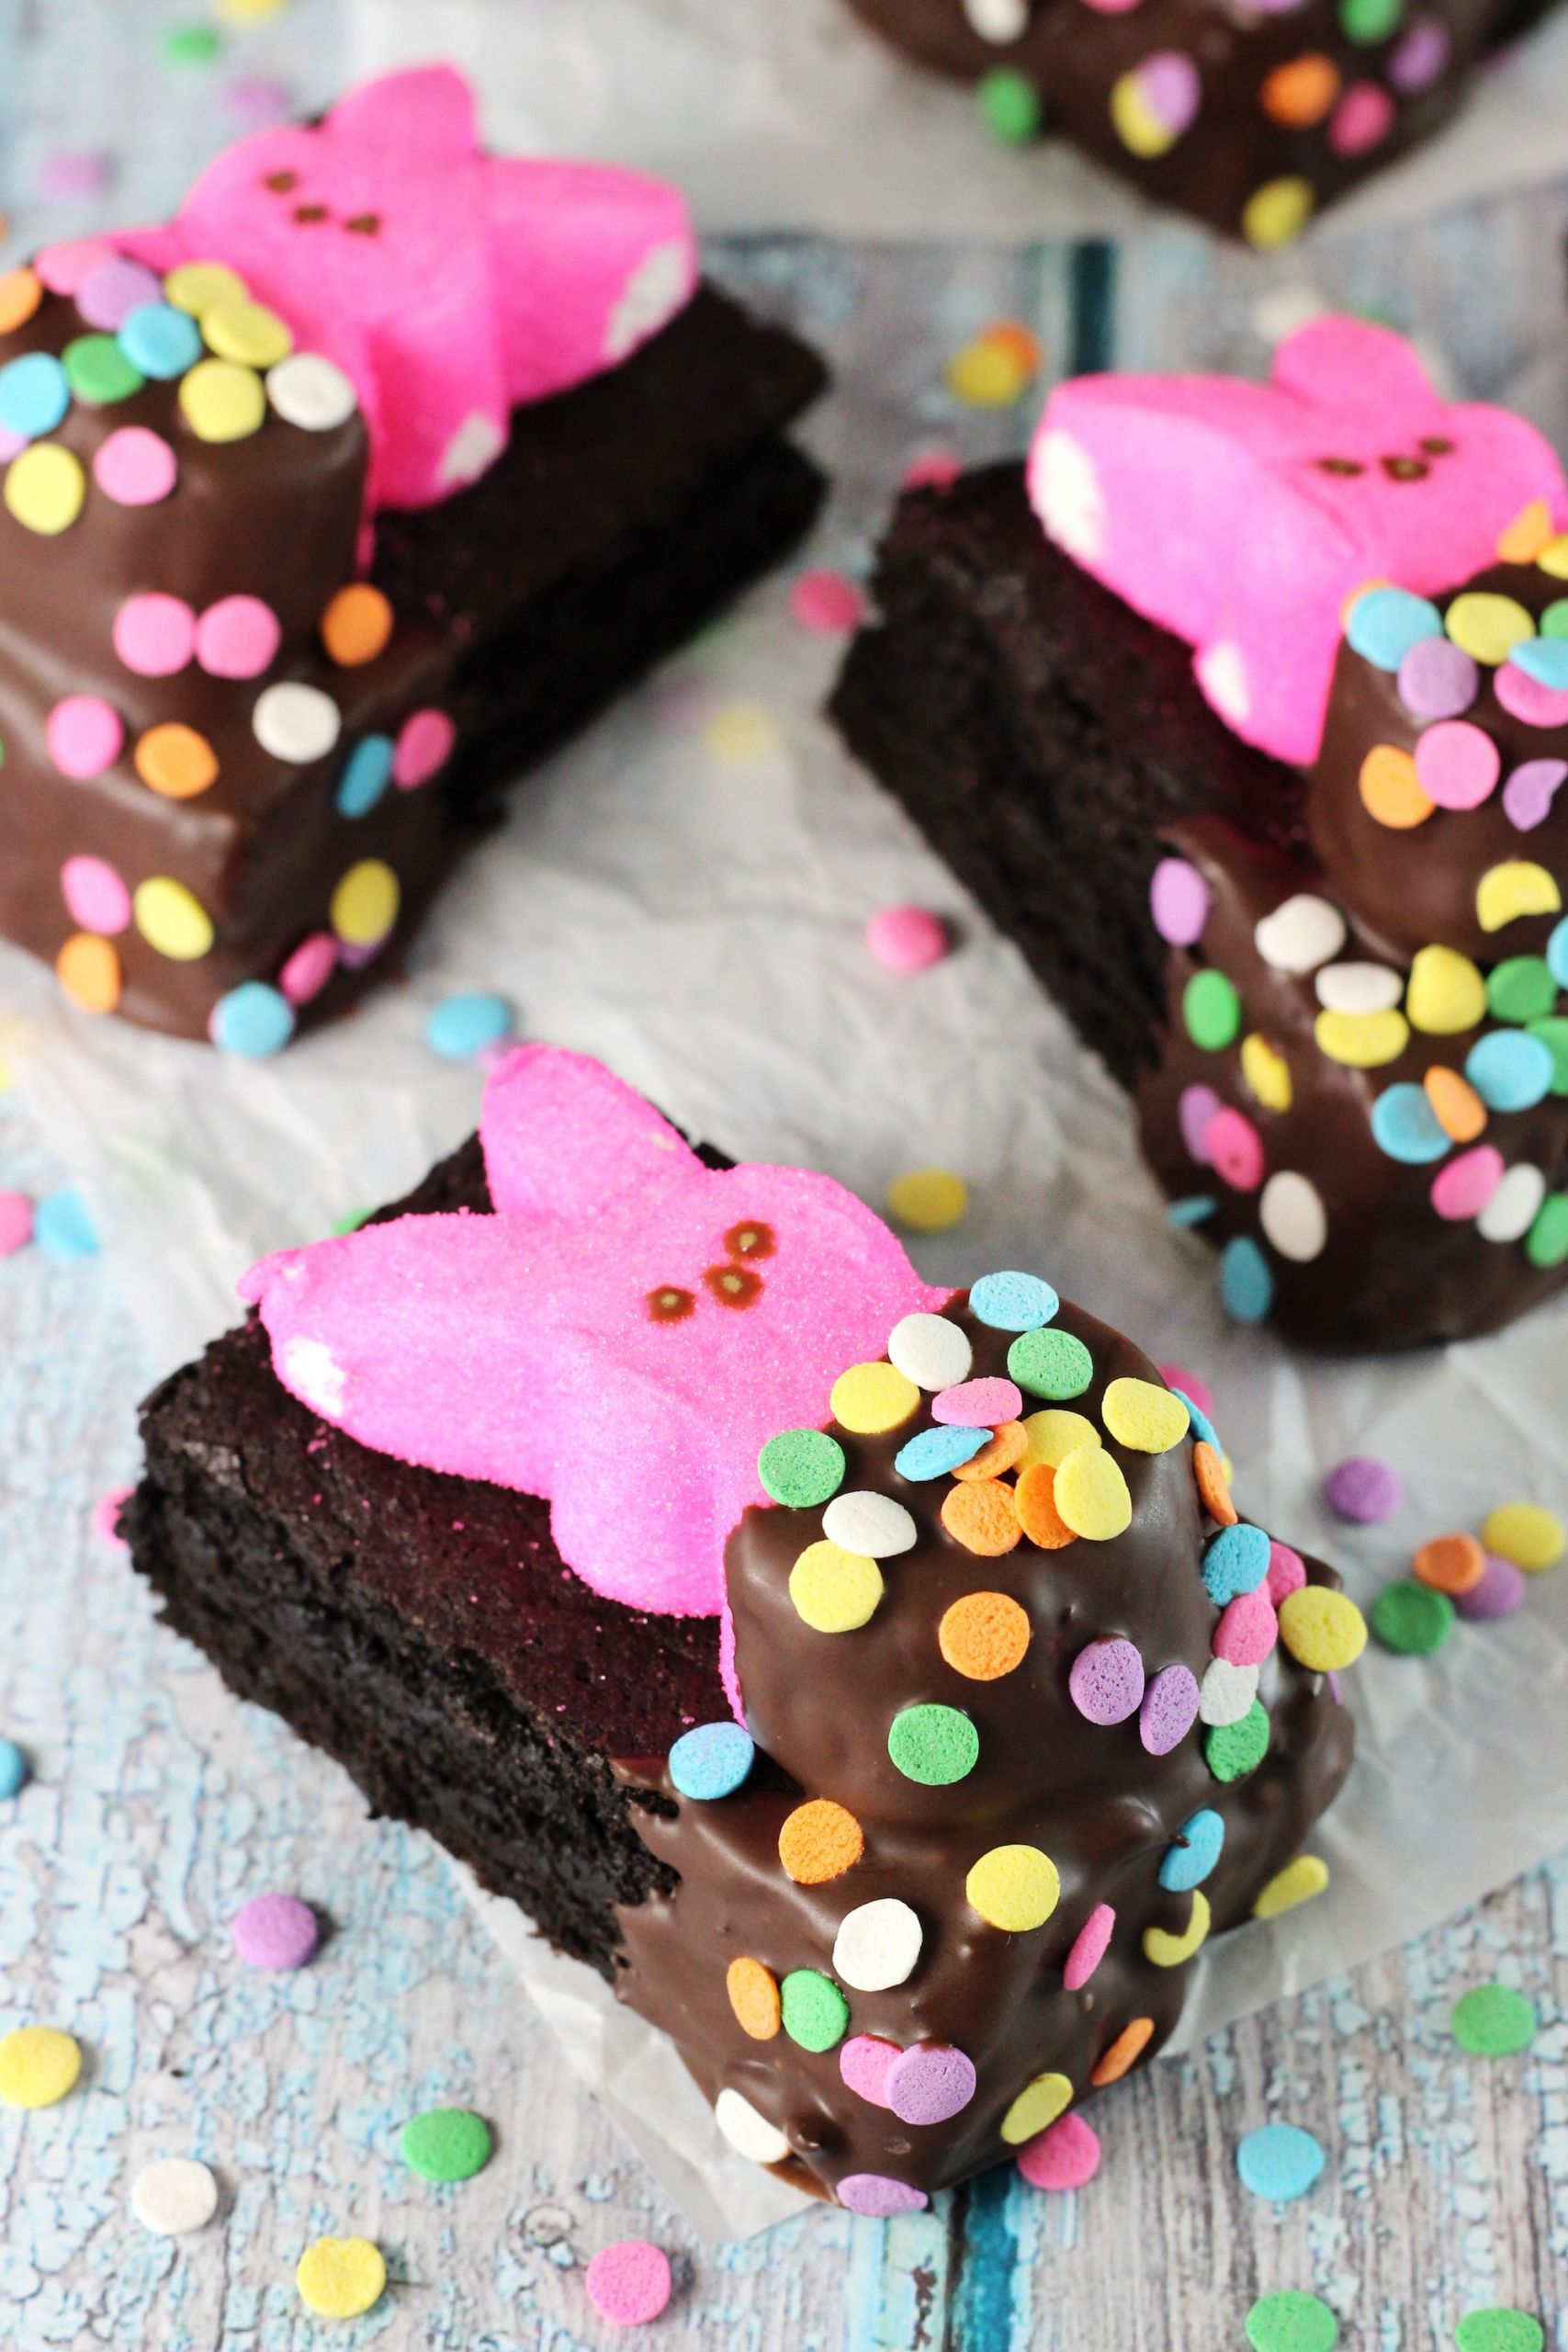 Recipes For Easter Desserts
 11 Easy Easter Desserts That Are Almost Too Adorable To